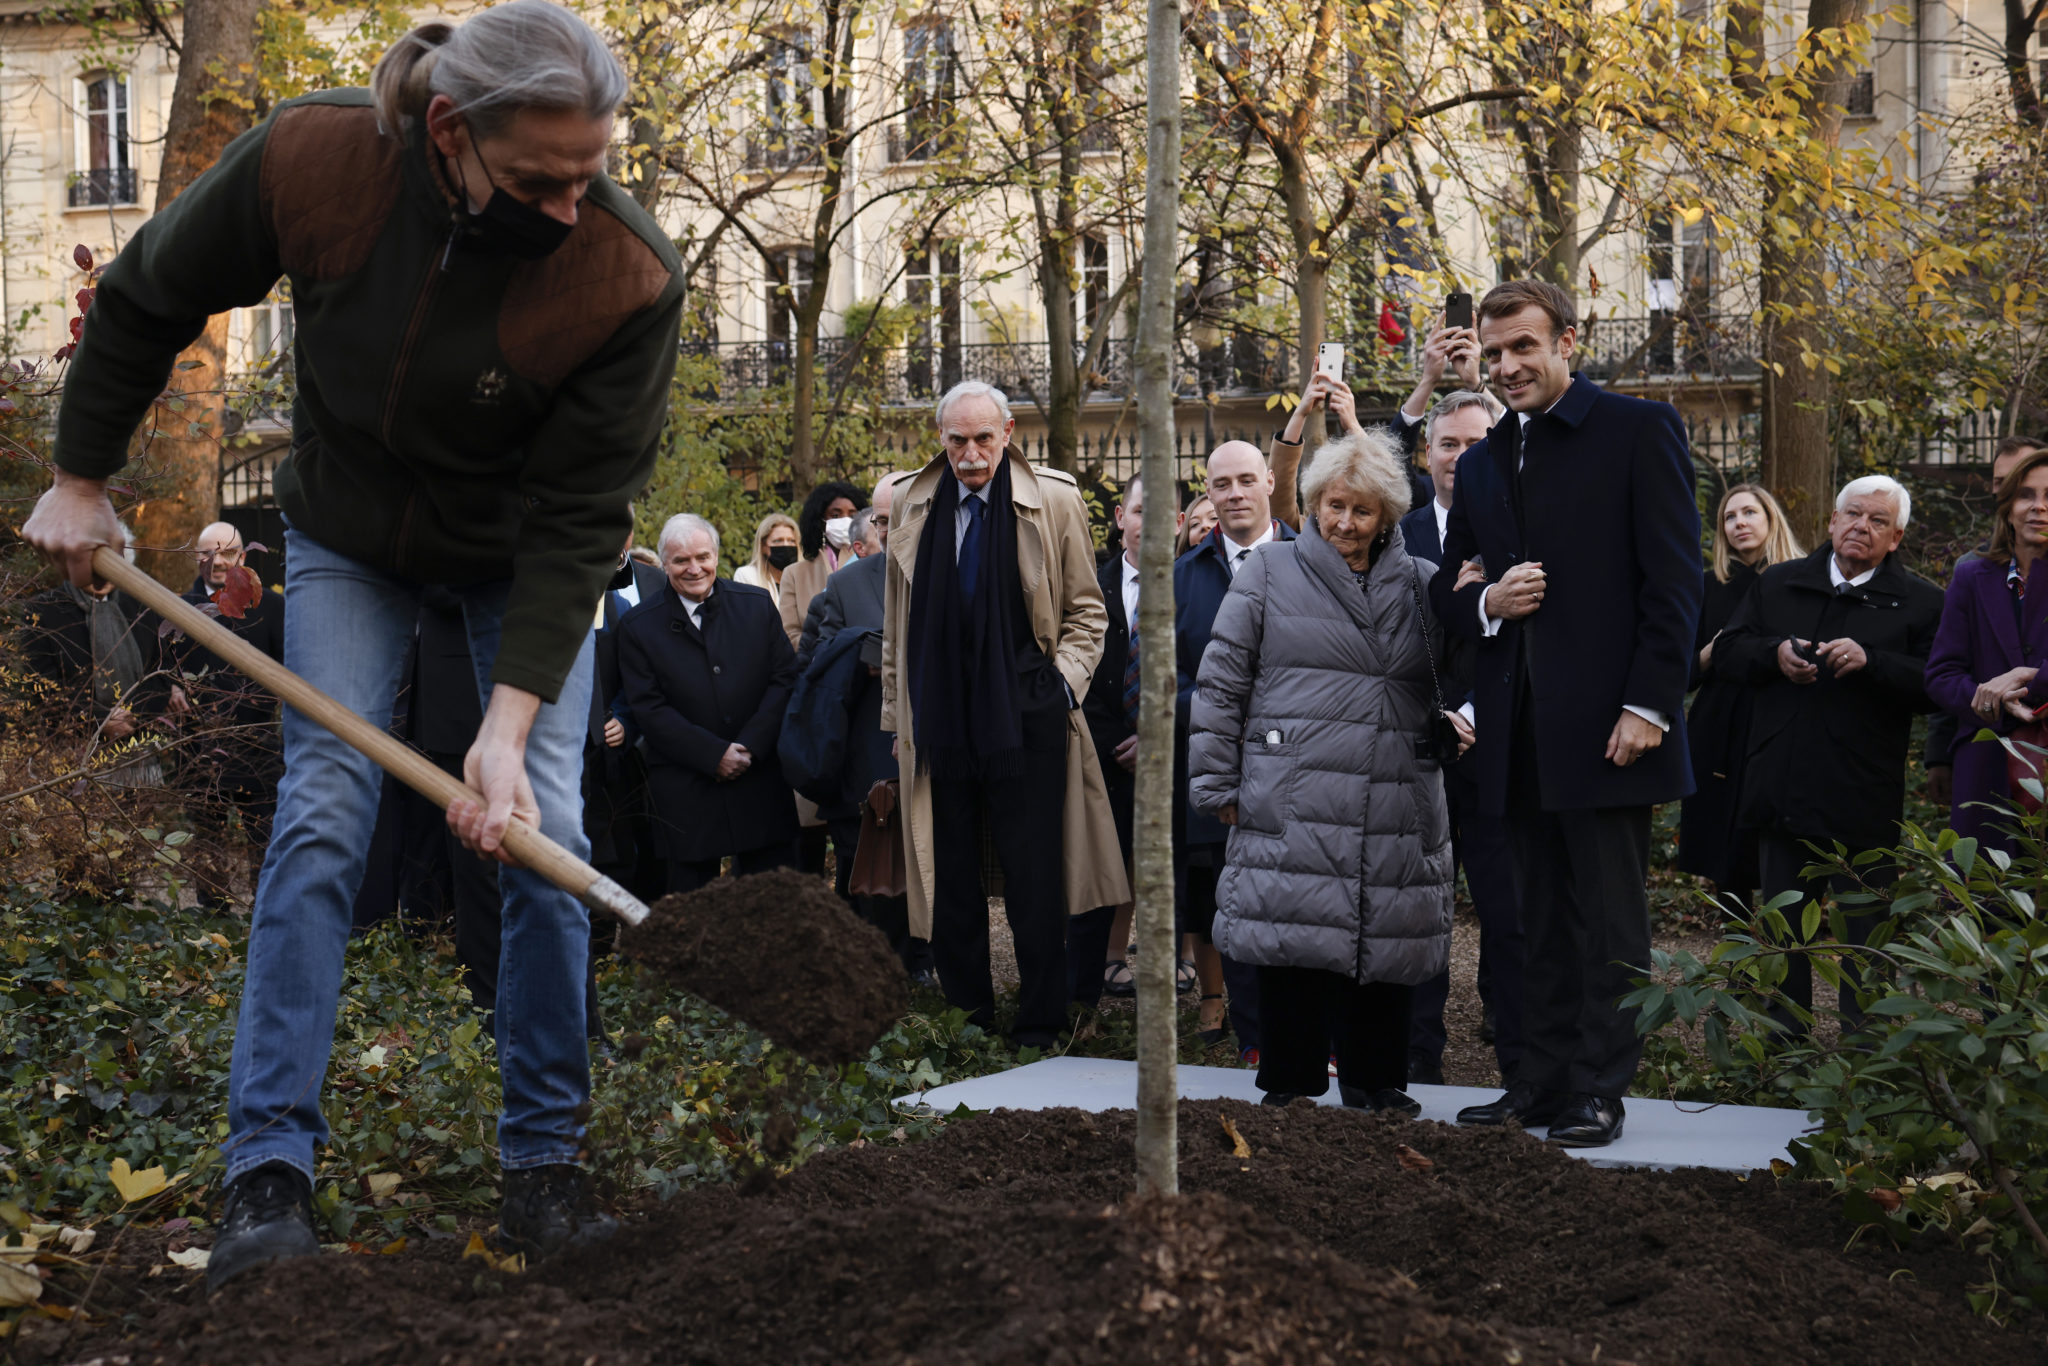 French President Emmanuel Macron and Canadian writer Antonine Maillet, watch a Gardner planting a tree in the garden of the Elysee Palace prior an awarding ceremony in Paris, Wednesday, Nov. 24 , 2021. Antonine Maillet was awarded with the Legion of Honor. (Yoan Valat/Pool Photo via AP)